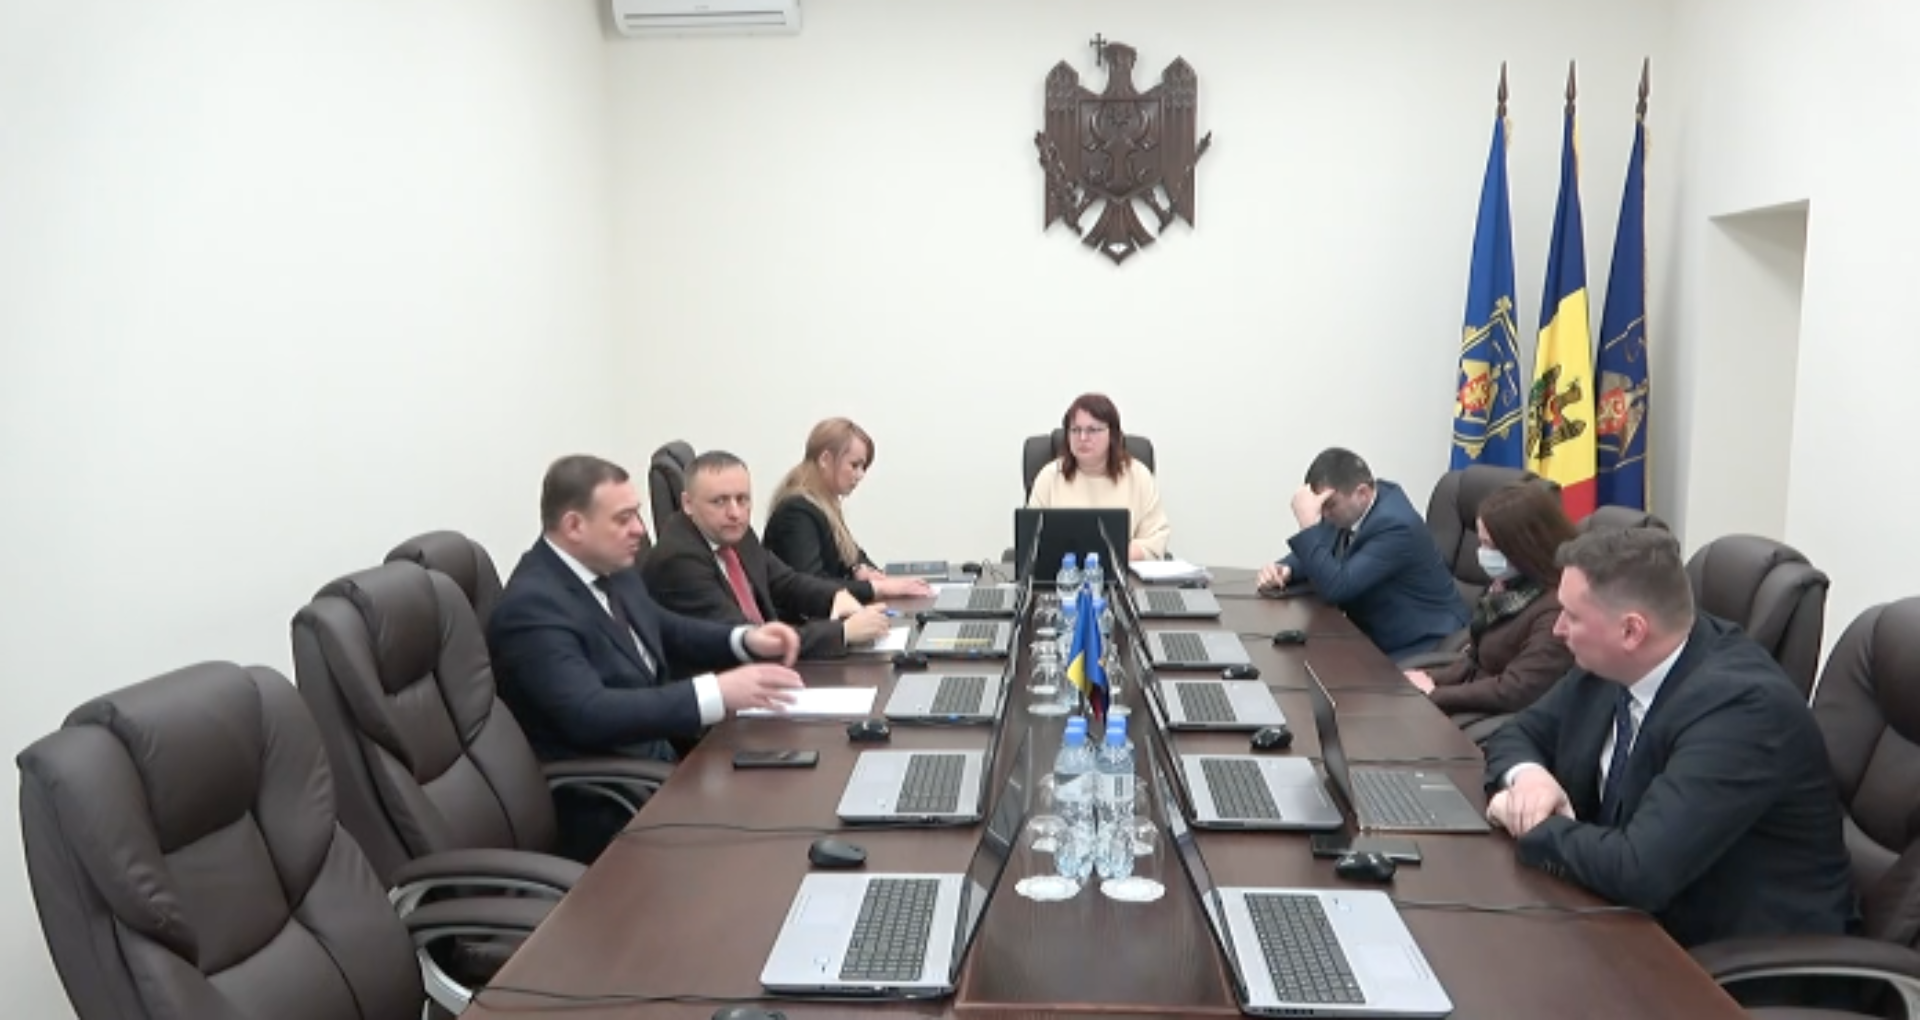 Meeting of the Superior Council of Prosecutors, postponed for the second time in a row